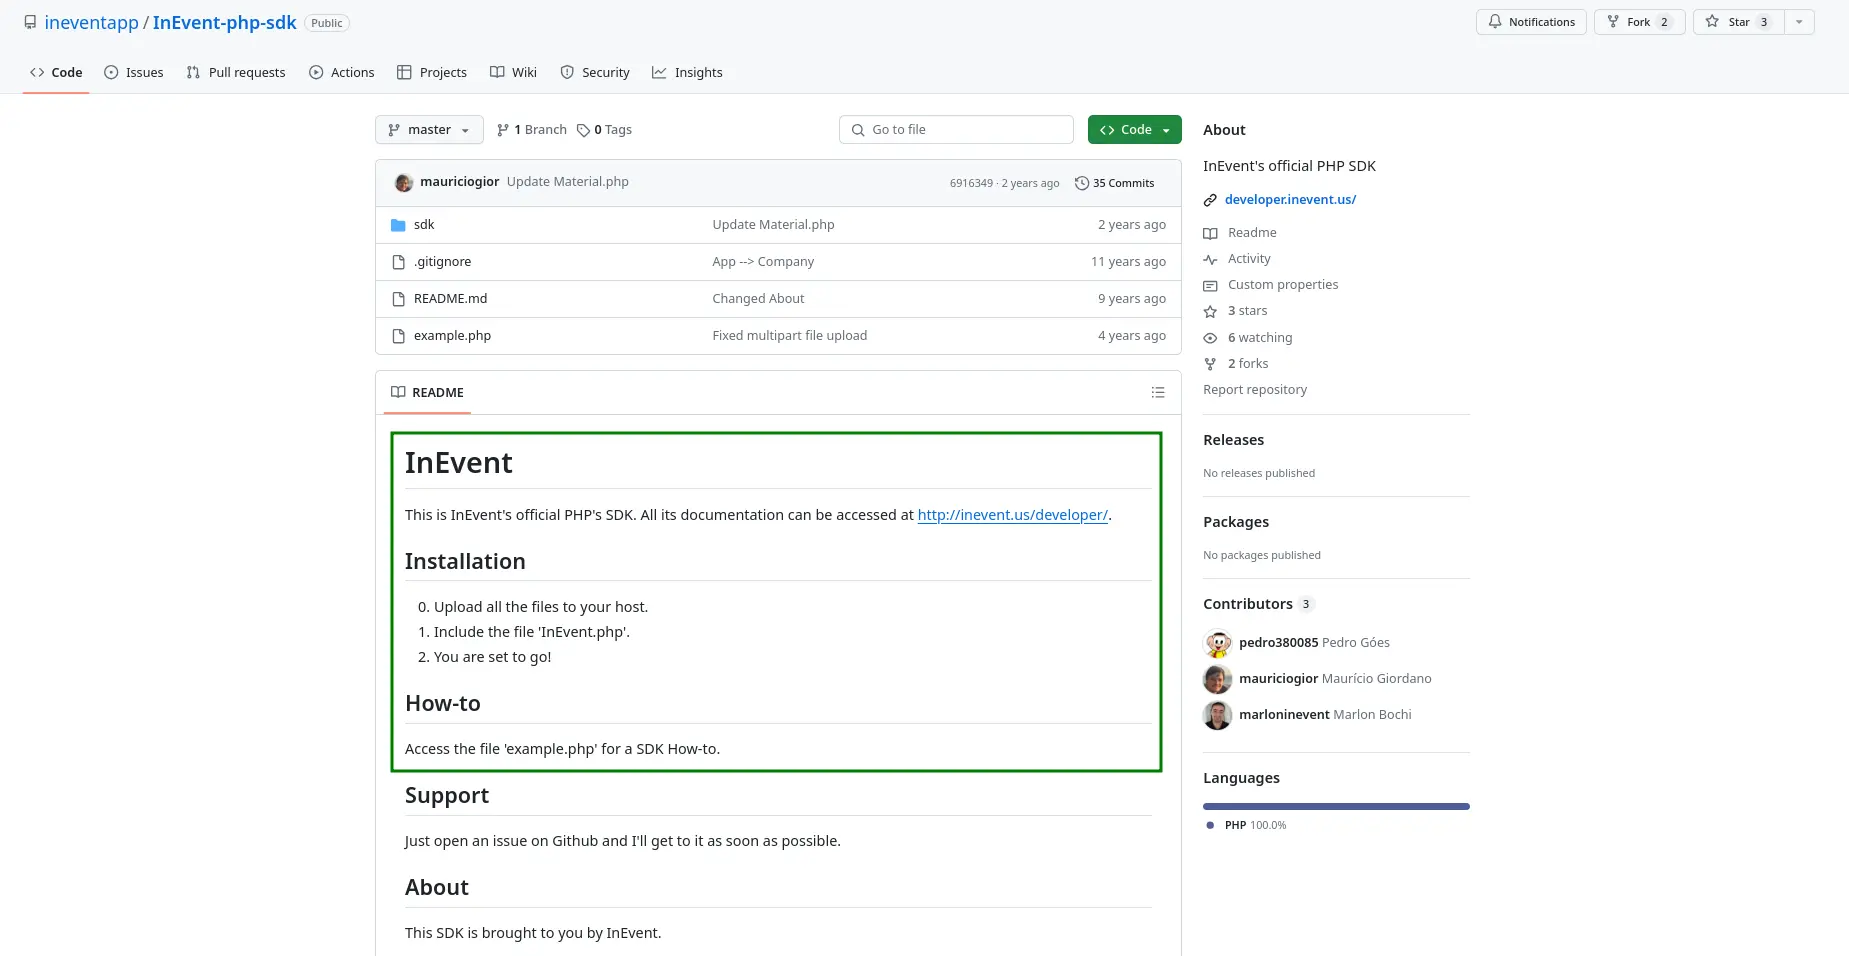 Screenshot showing the InEvent PHP SDK GitHub repo